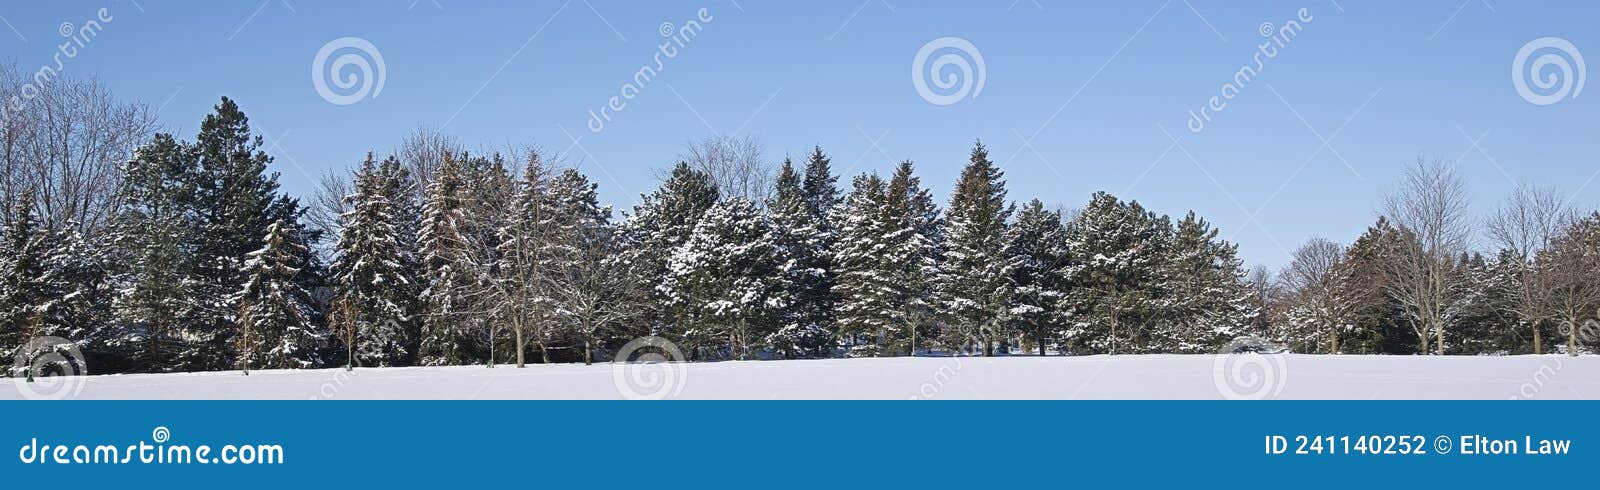 tranquillity scene of a panoramic view of snow covered pine trees in winter park.